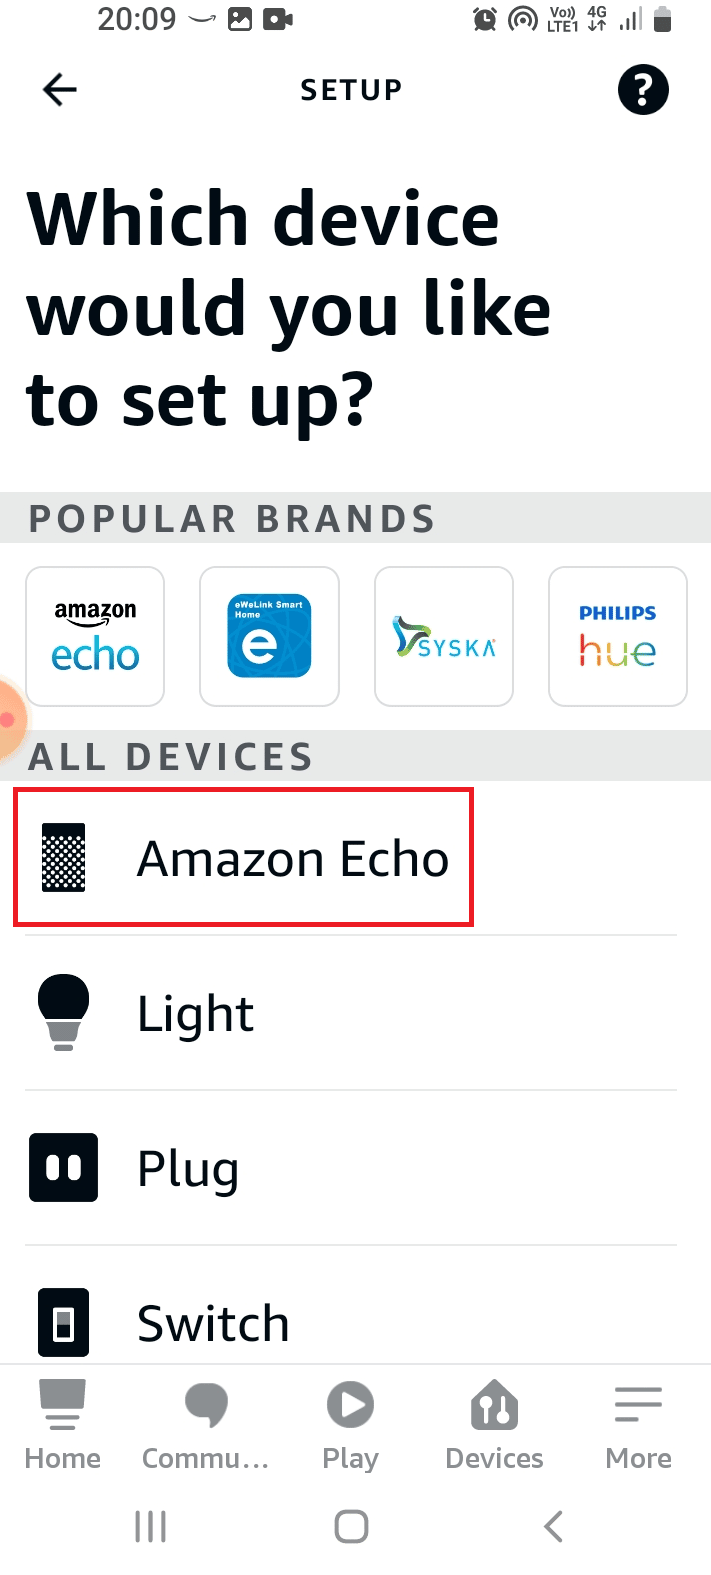 Tap on the Amazon Echo option in the ALL DEVICES section